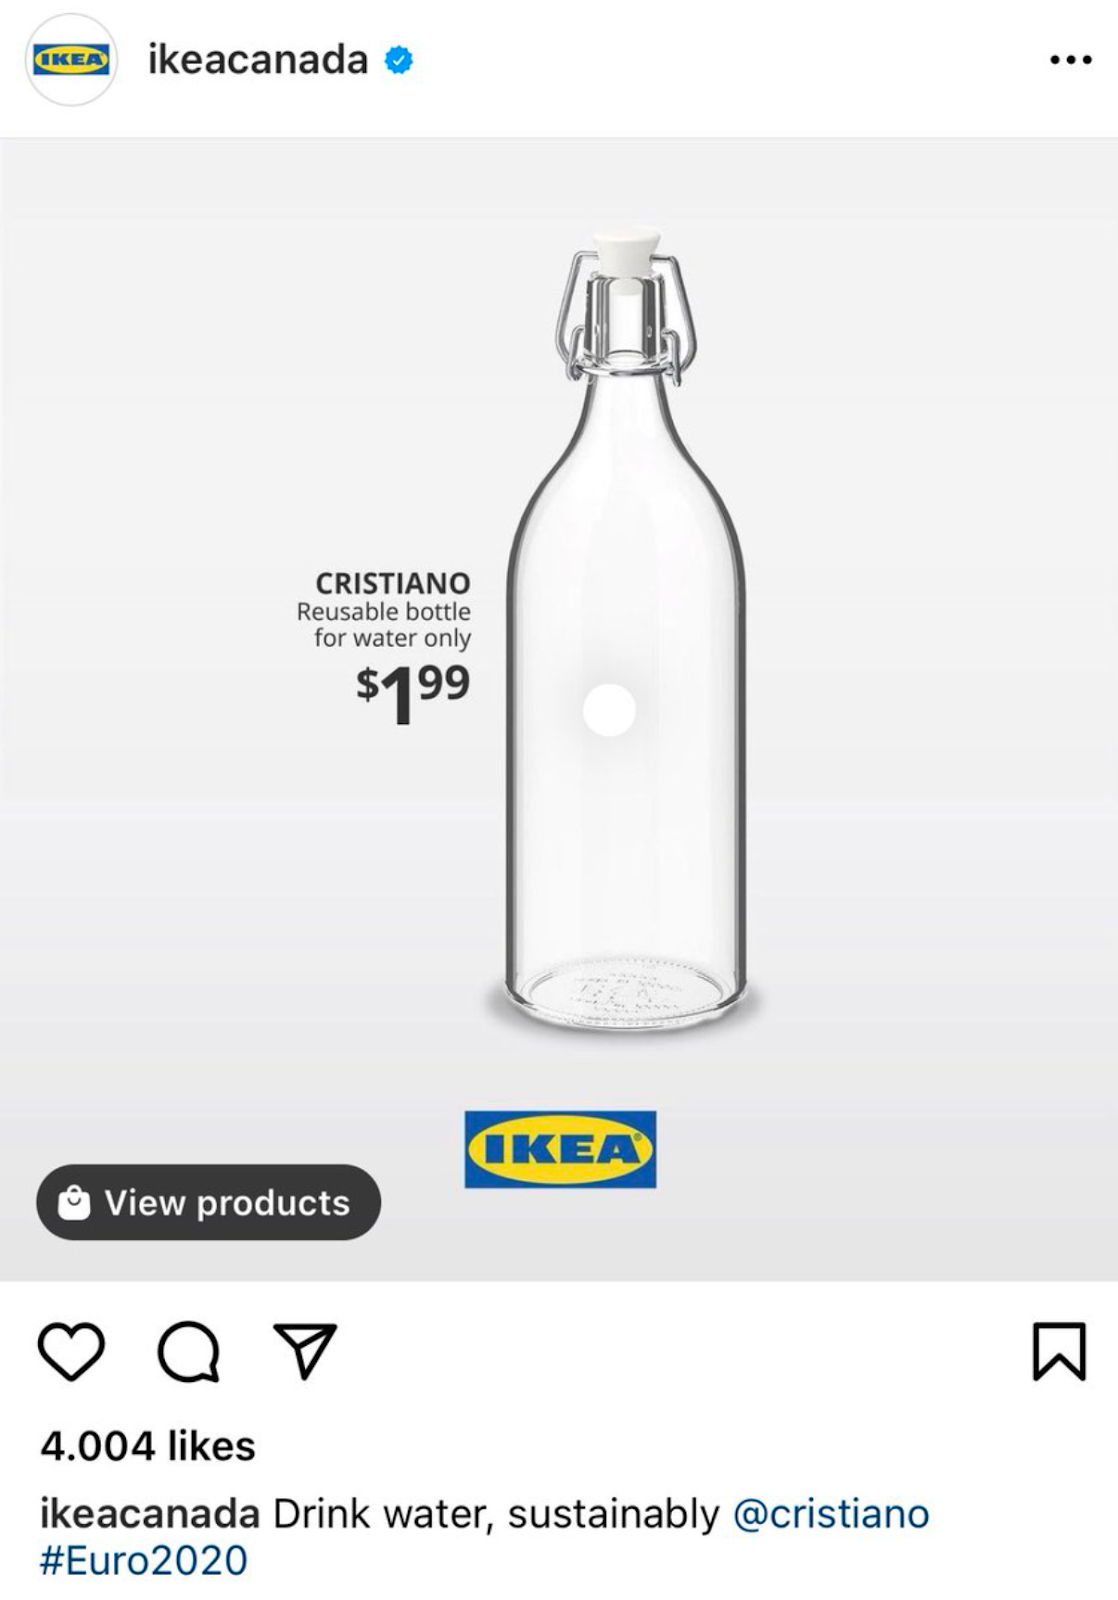 Example of newsjacking by IKEA, Christiano at Euro 2020